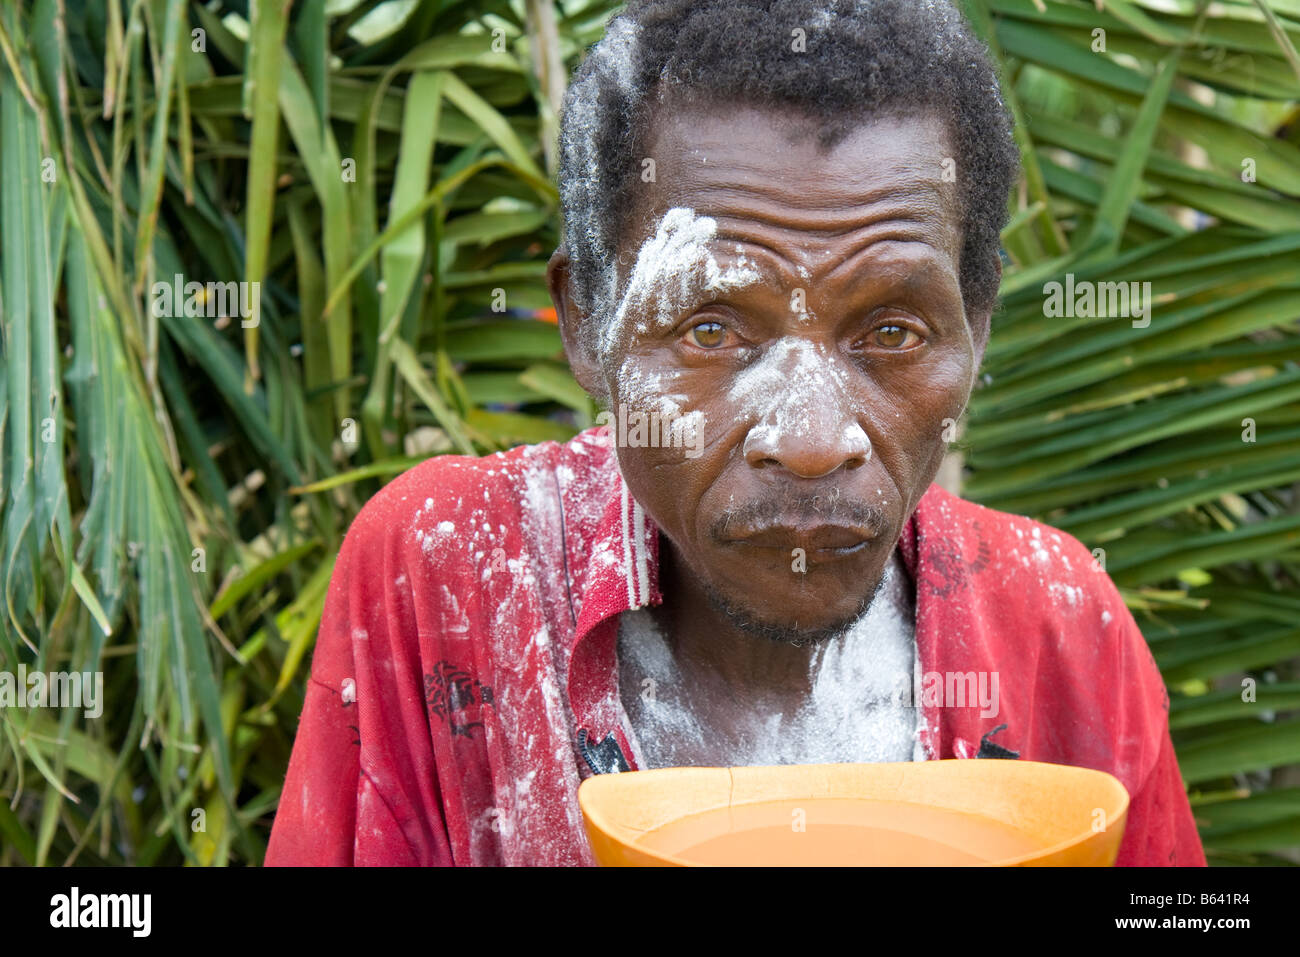 A man covered in talc powder (indicating he has already been initiated), drinks palm wine during the Evala Festival in Togo. Stock Photo